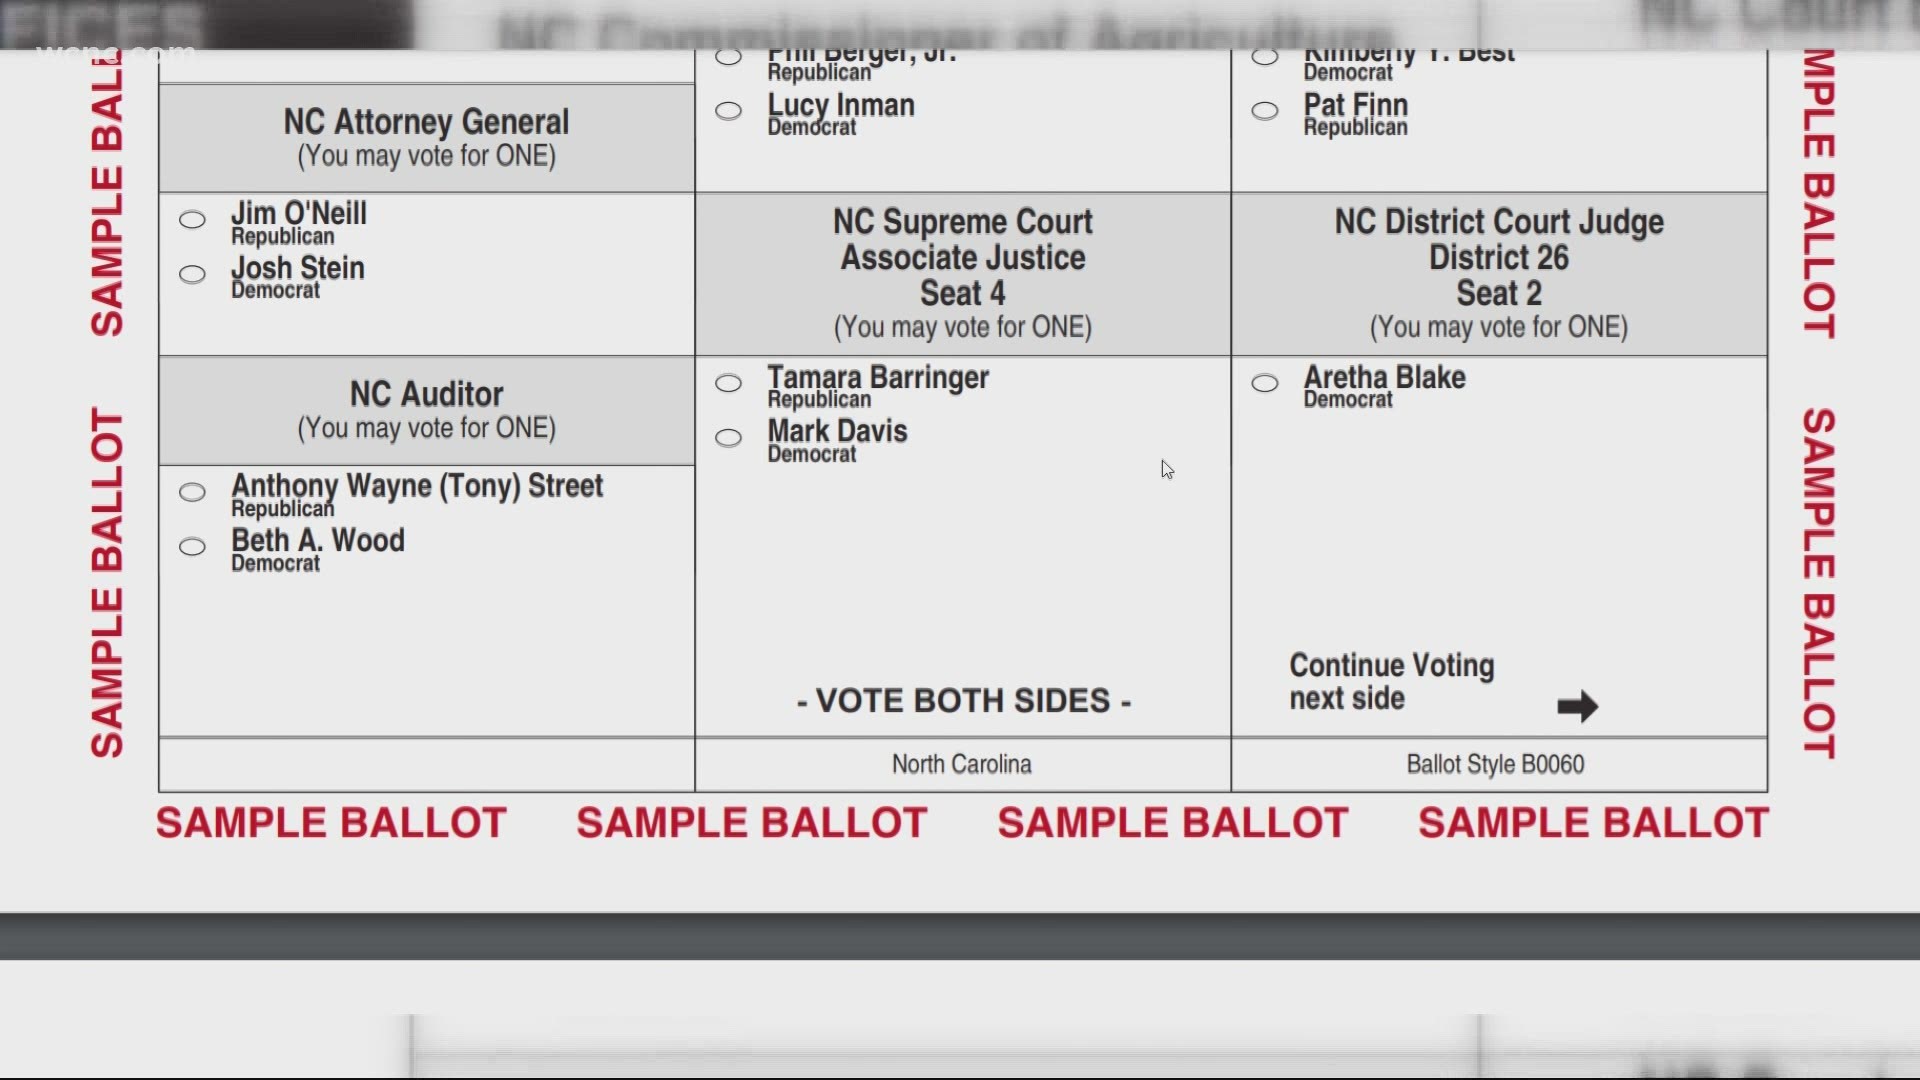 We will walk you through a sample ballot to prepare you for when you head to the polls.